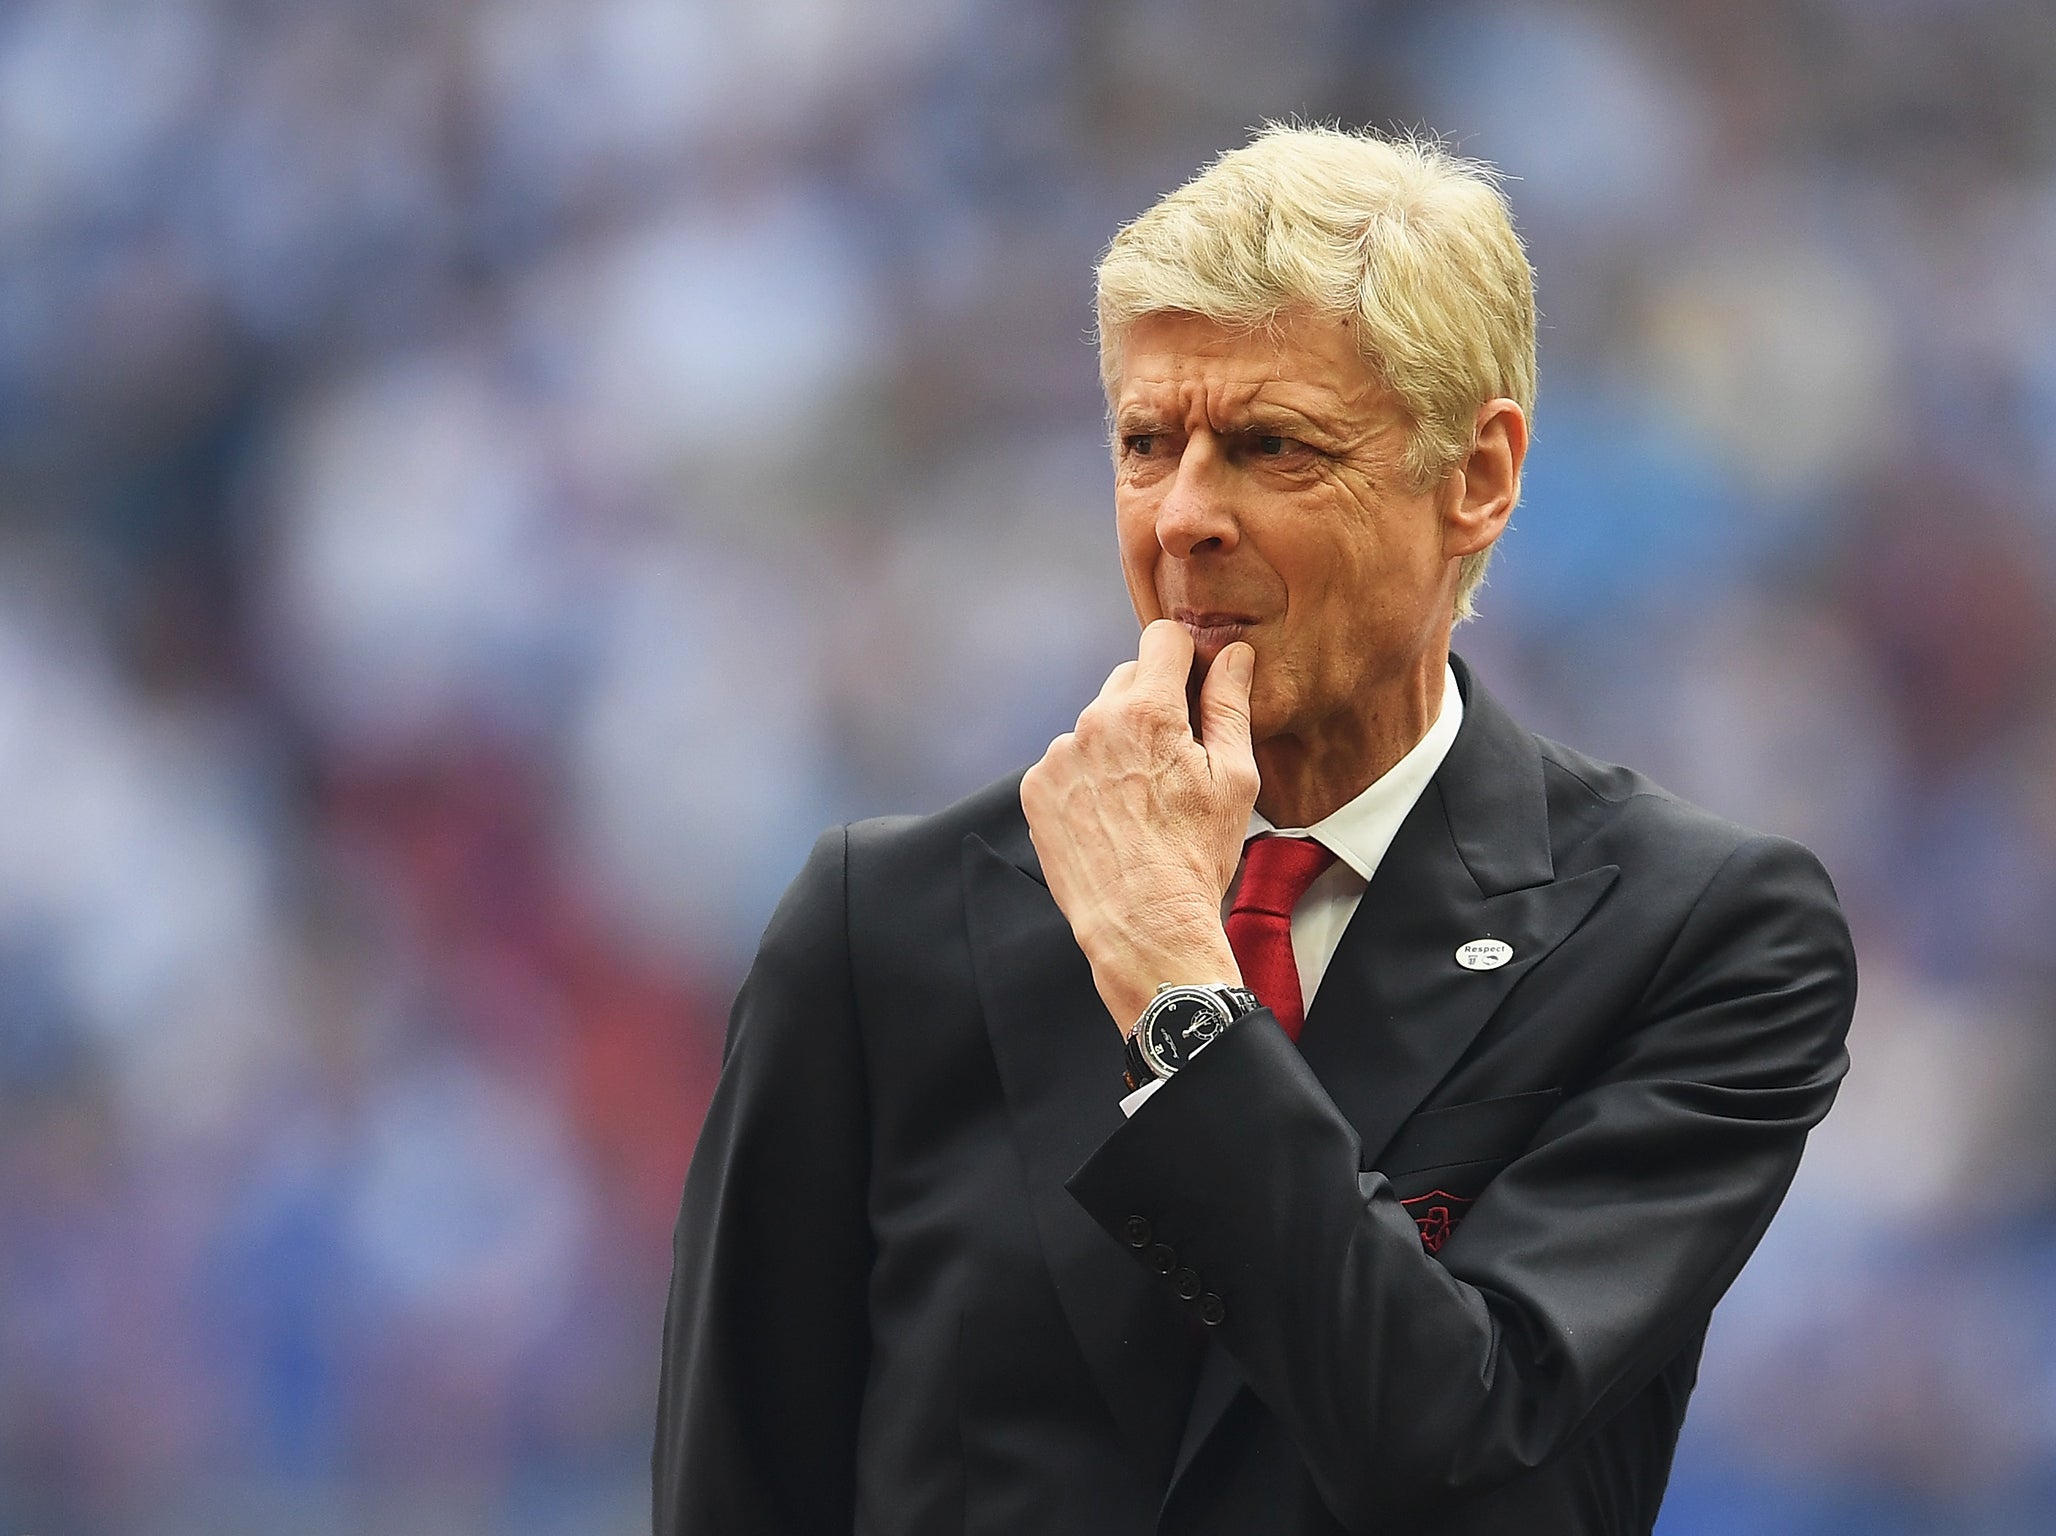 Arsenal manager Arsene Wenger outlines his plans for the end of the season